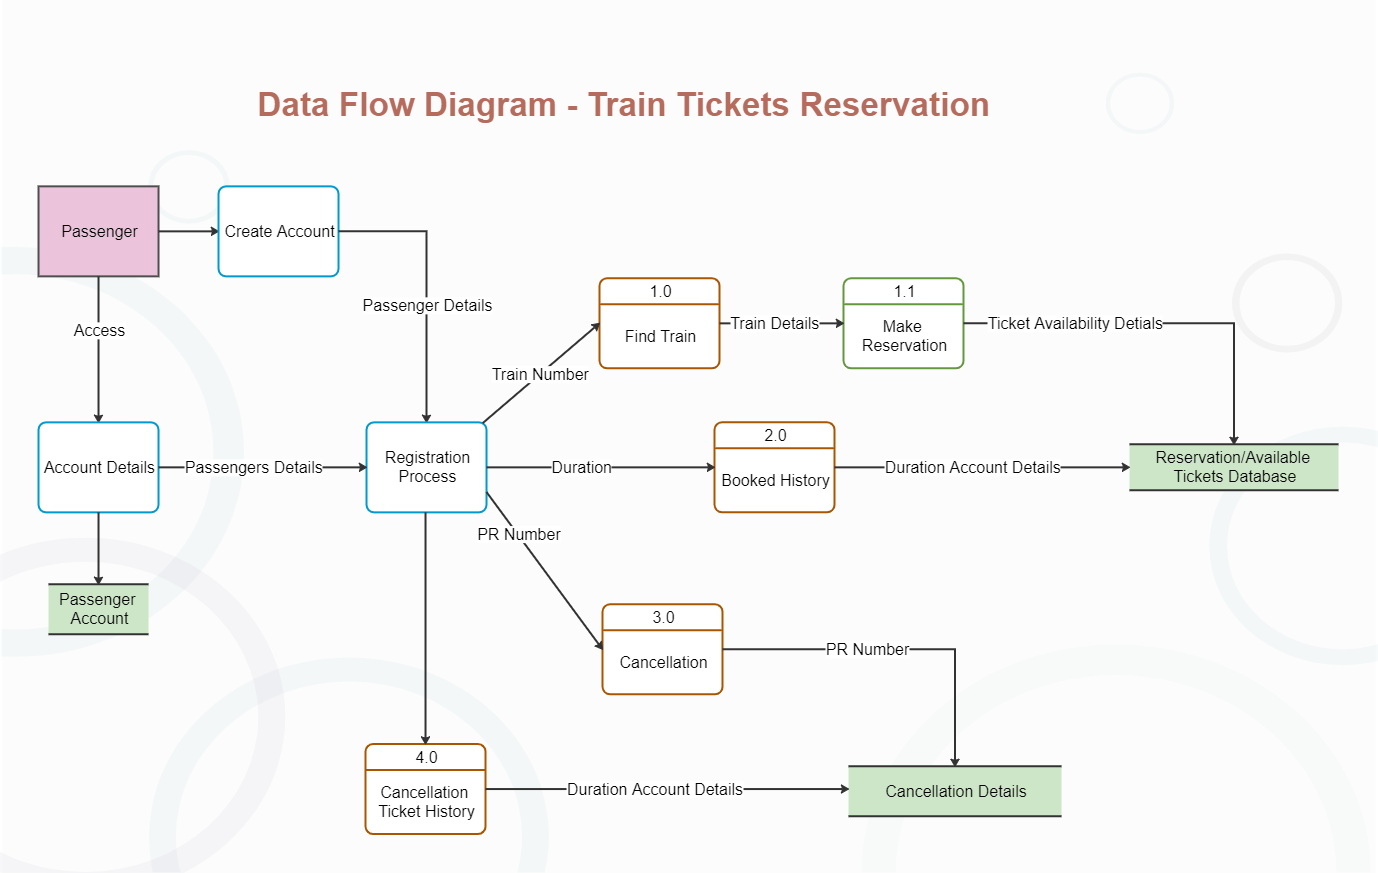 Train Tickets Reservation DFD